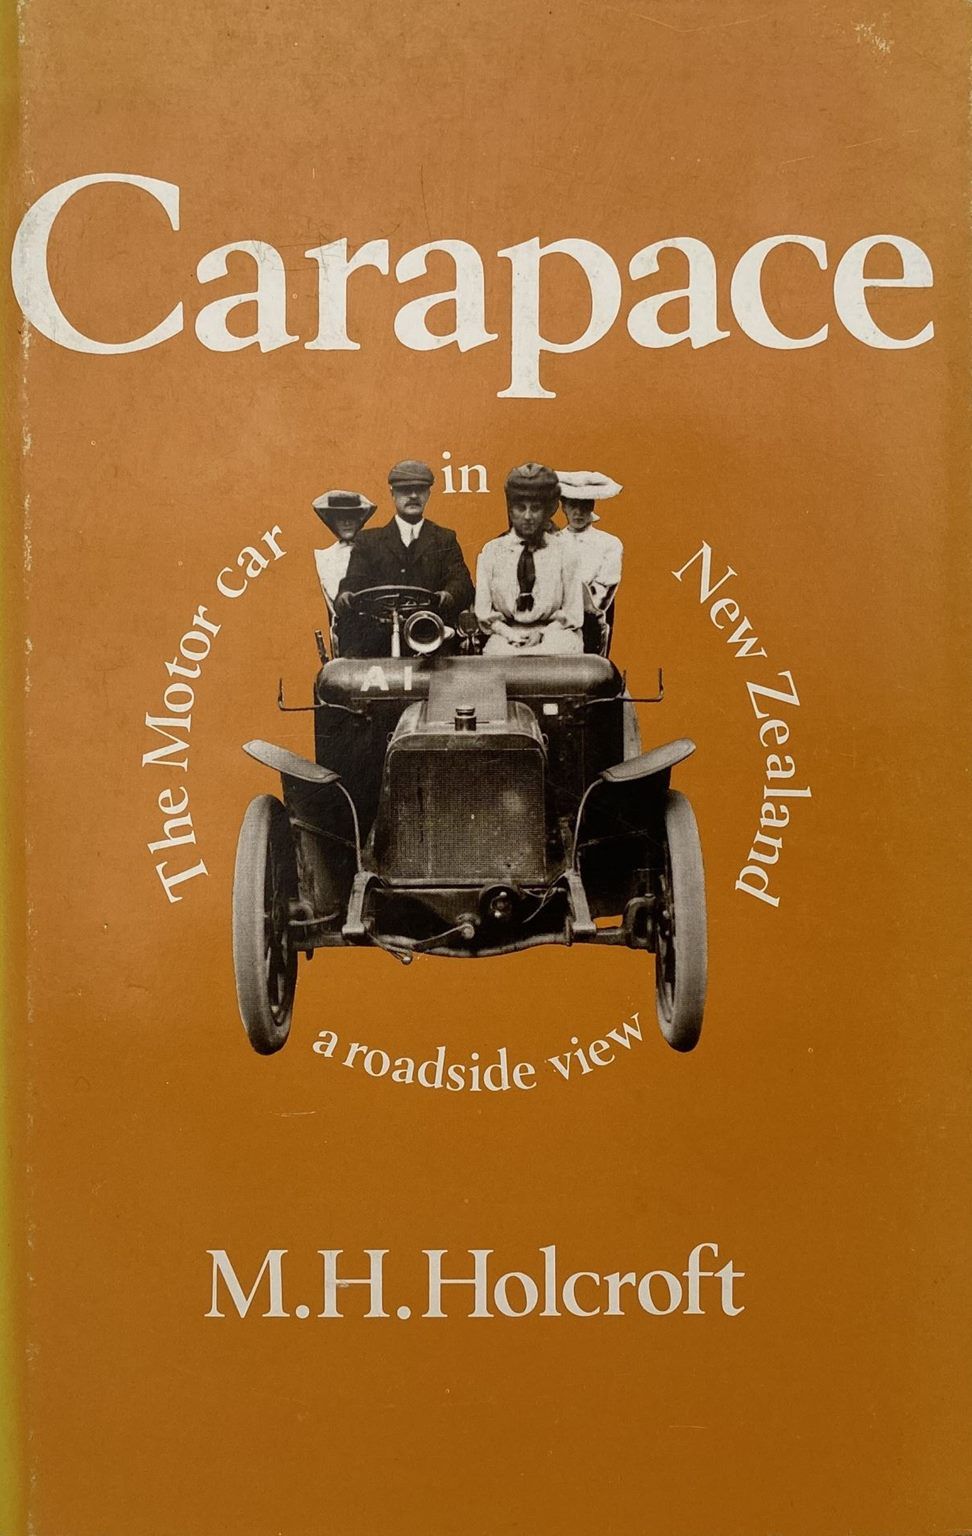 CARAPACE: The Motor car in New Zealand